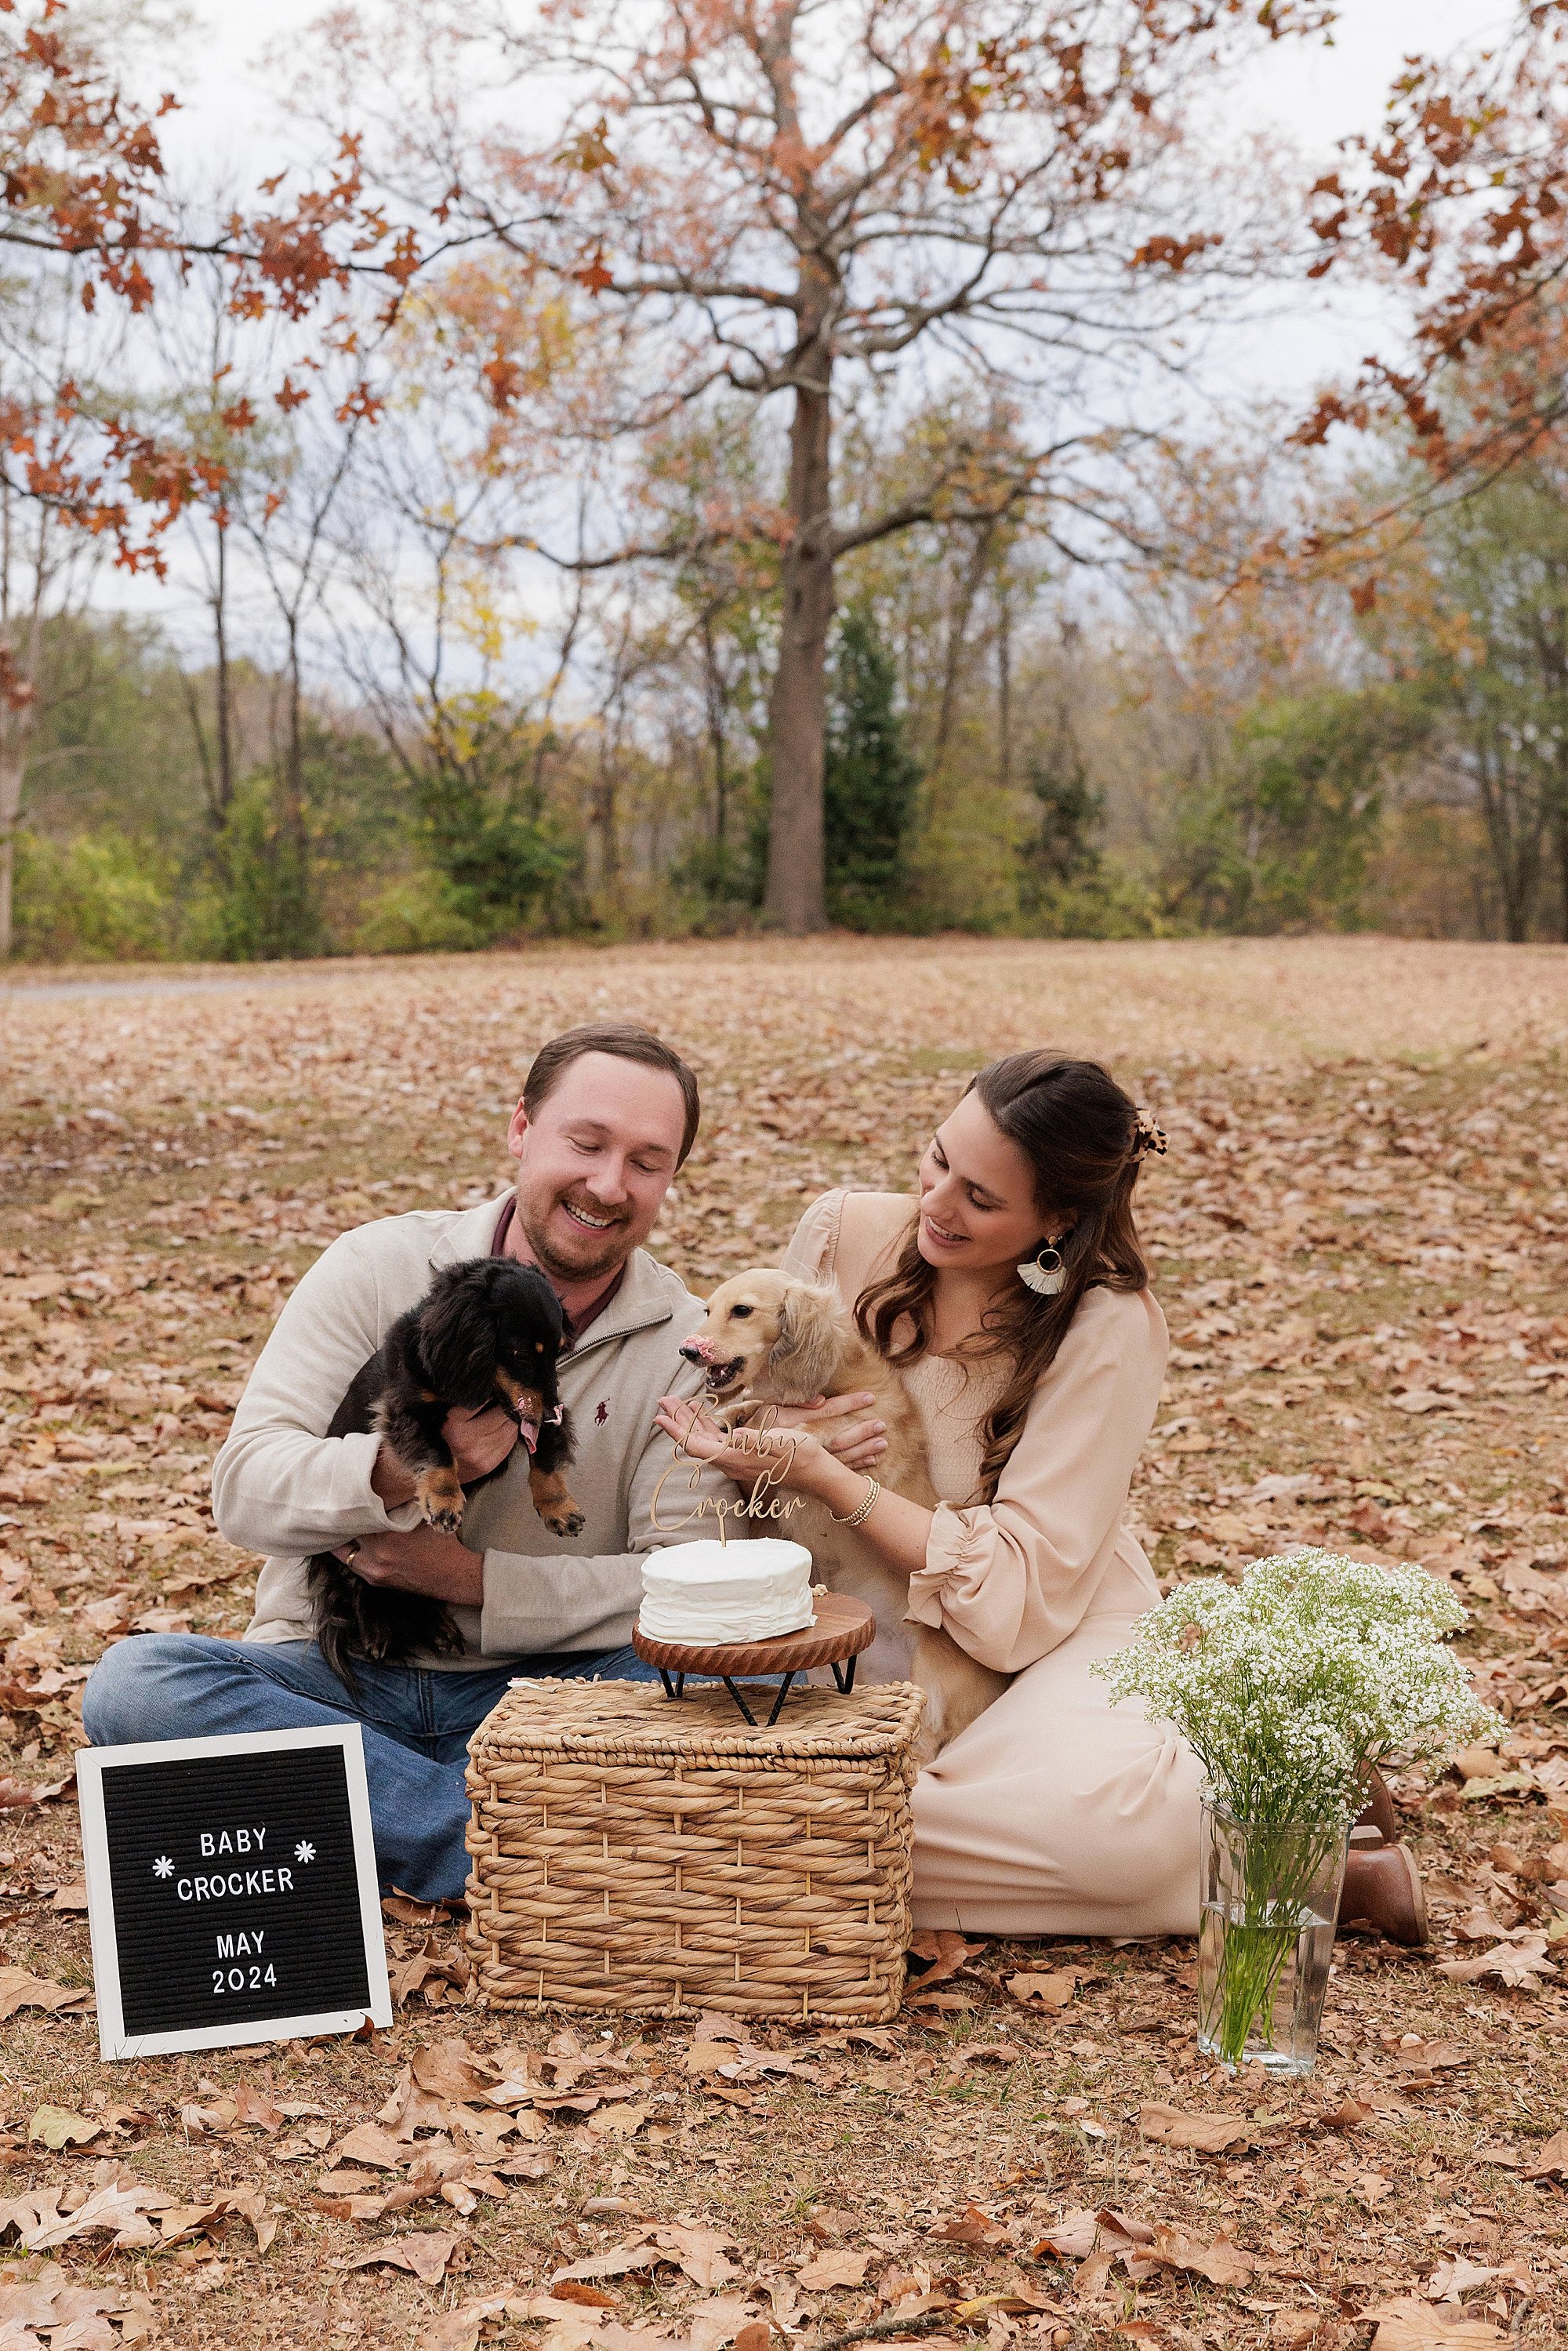 intown-atlanta-morningside-decatur-brookhaven-buckhead-outdoor-couples-maternity-fall-photoshoot-daschunds-doxies-gender-reveal_6186.jpg